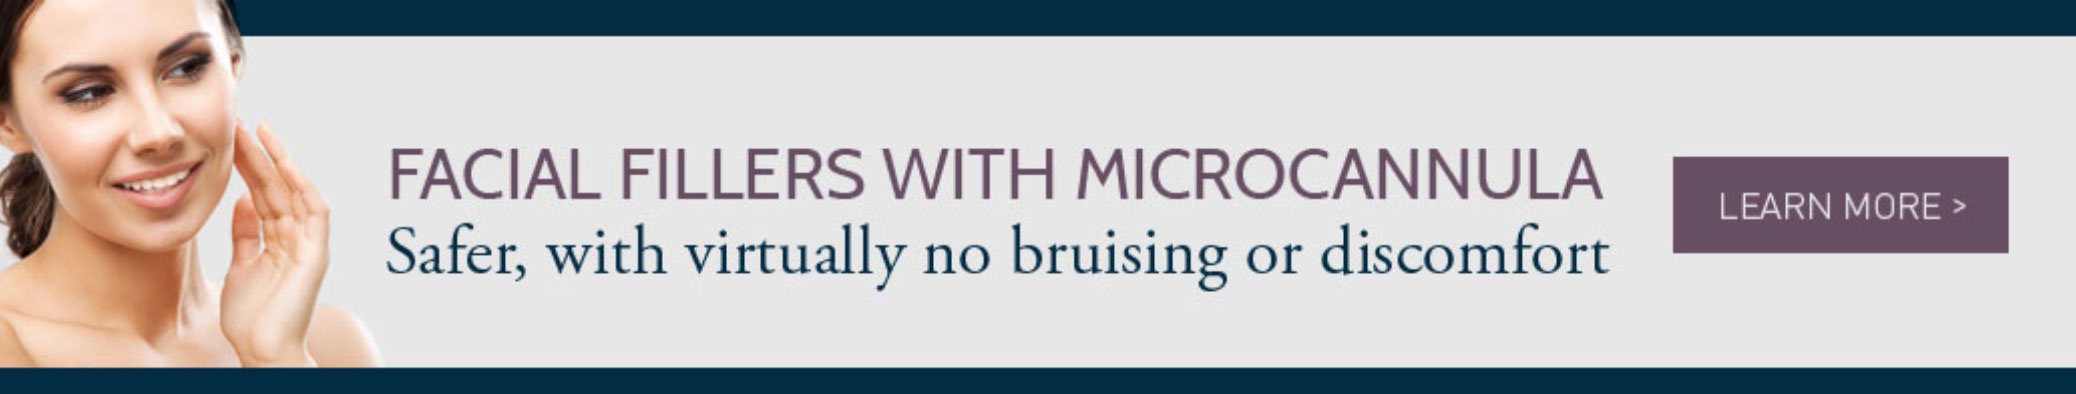 Facial fillers with microcannula: safer, with virtually no bruising or discomfort, learn more